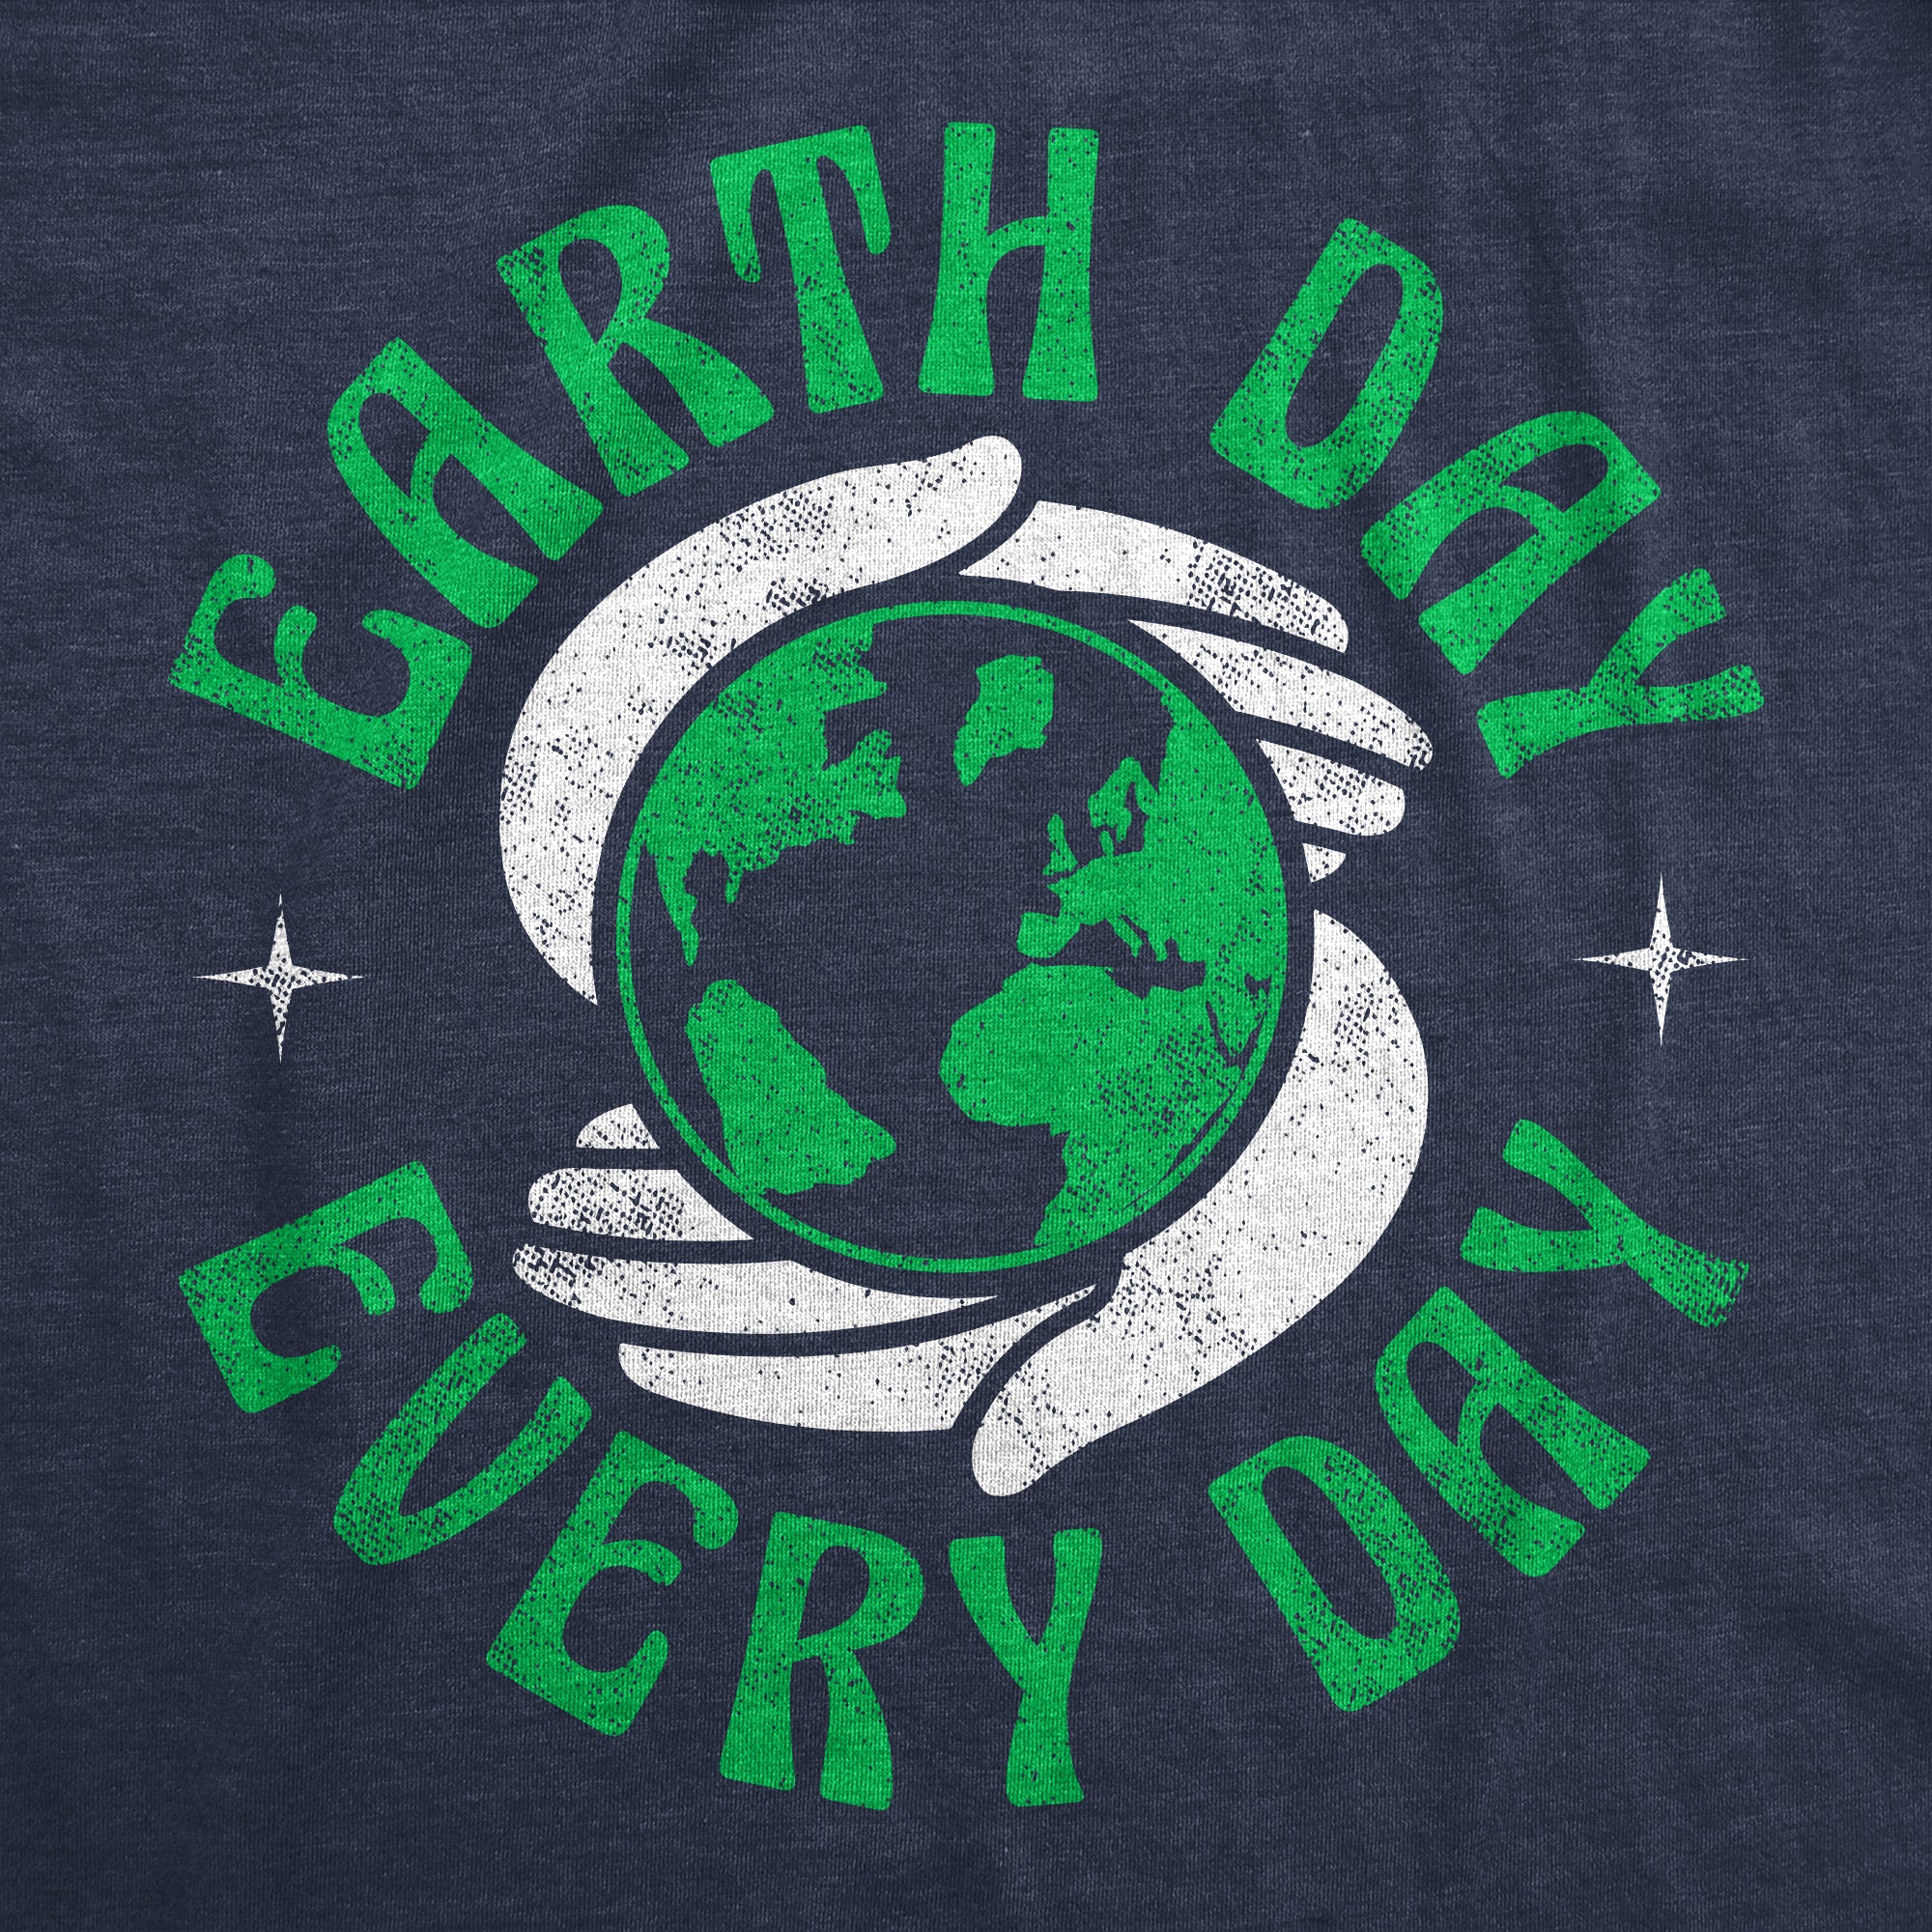 Funny Heather Navy - Every Day Earth Day Every Day Womens T Shirt Nerdy Earth Retro Tee